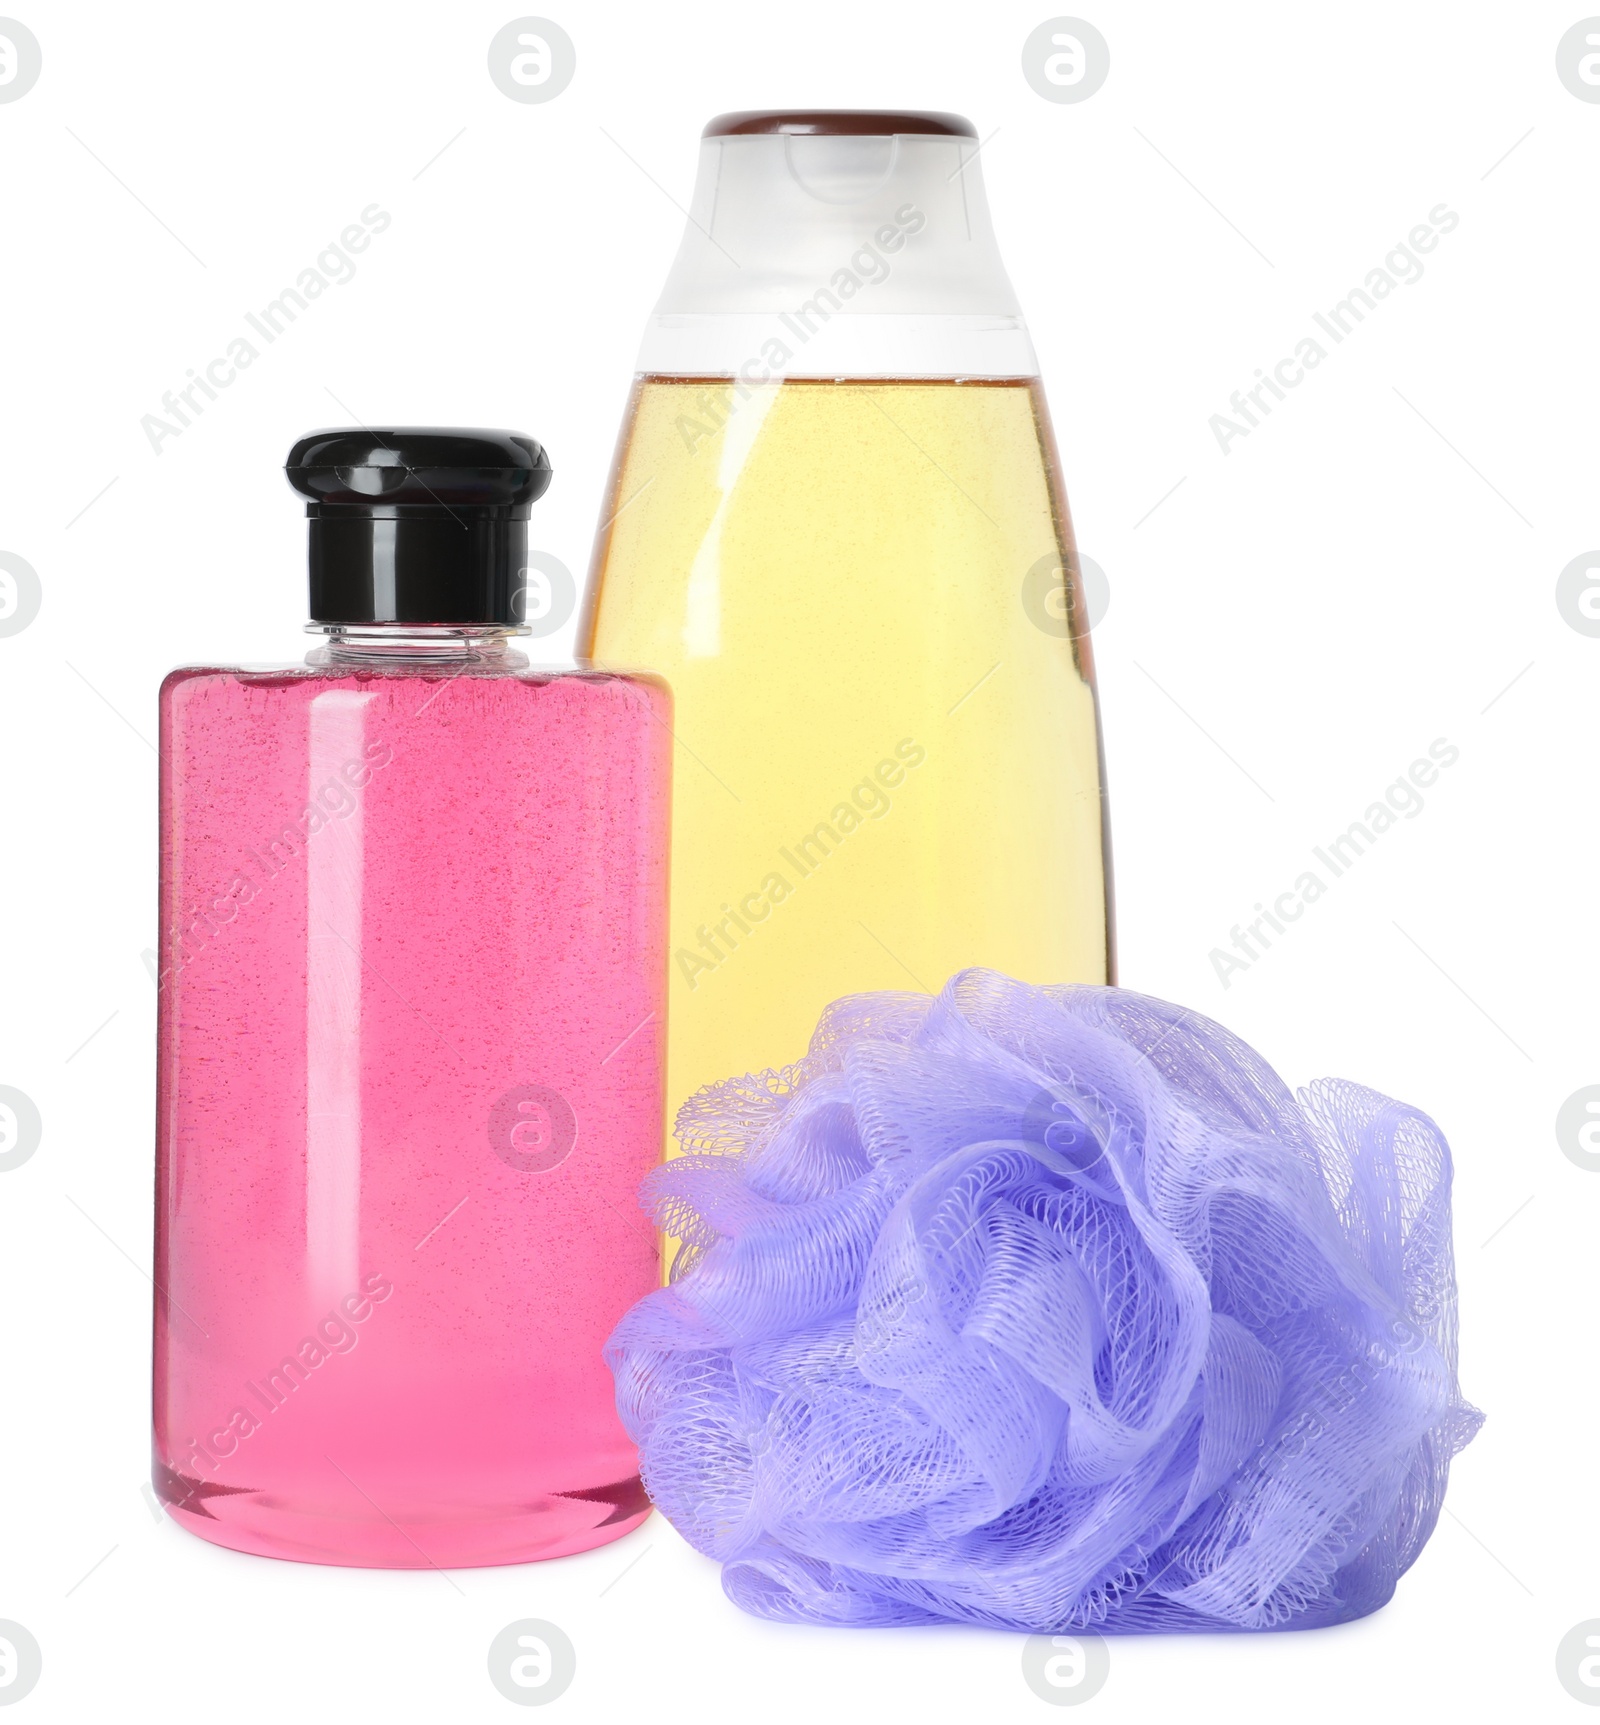 Photo of Personal hygiene products and shower puff on white background